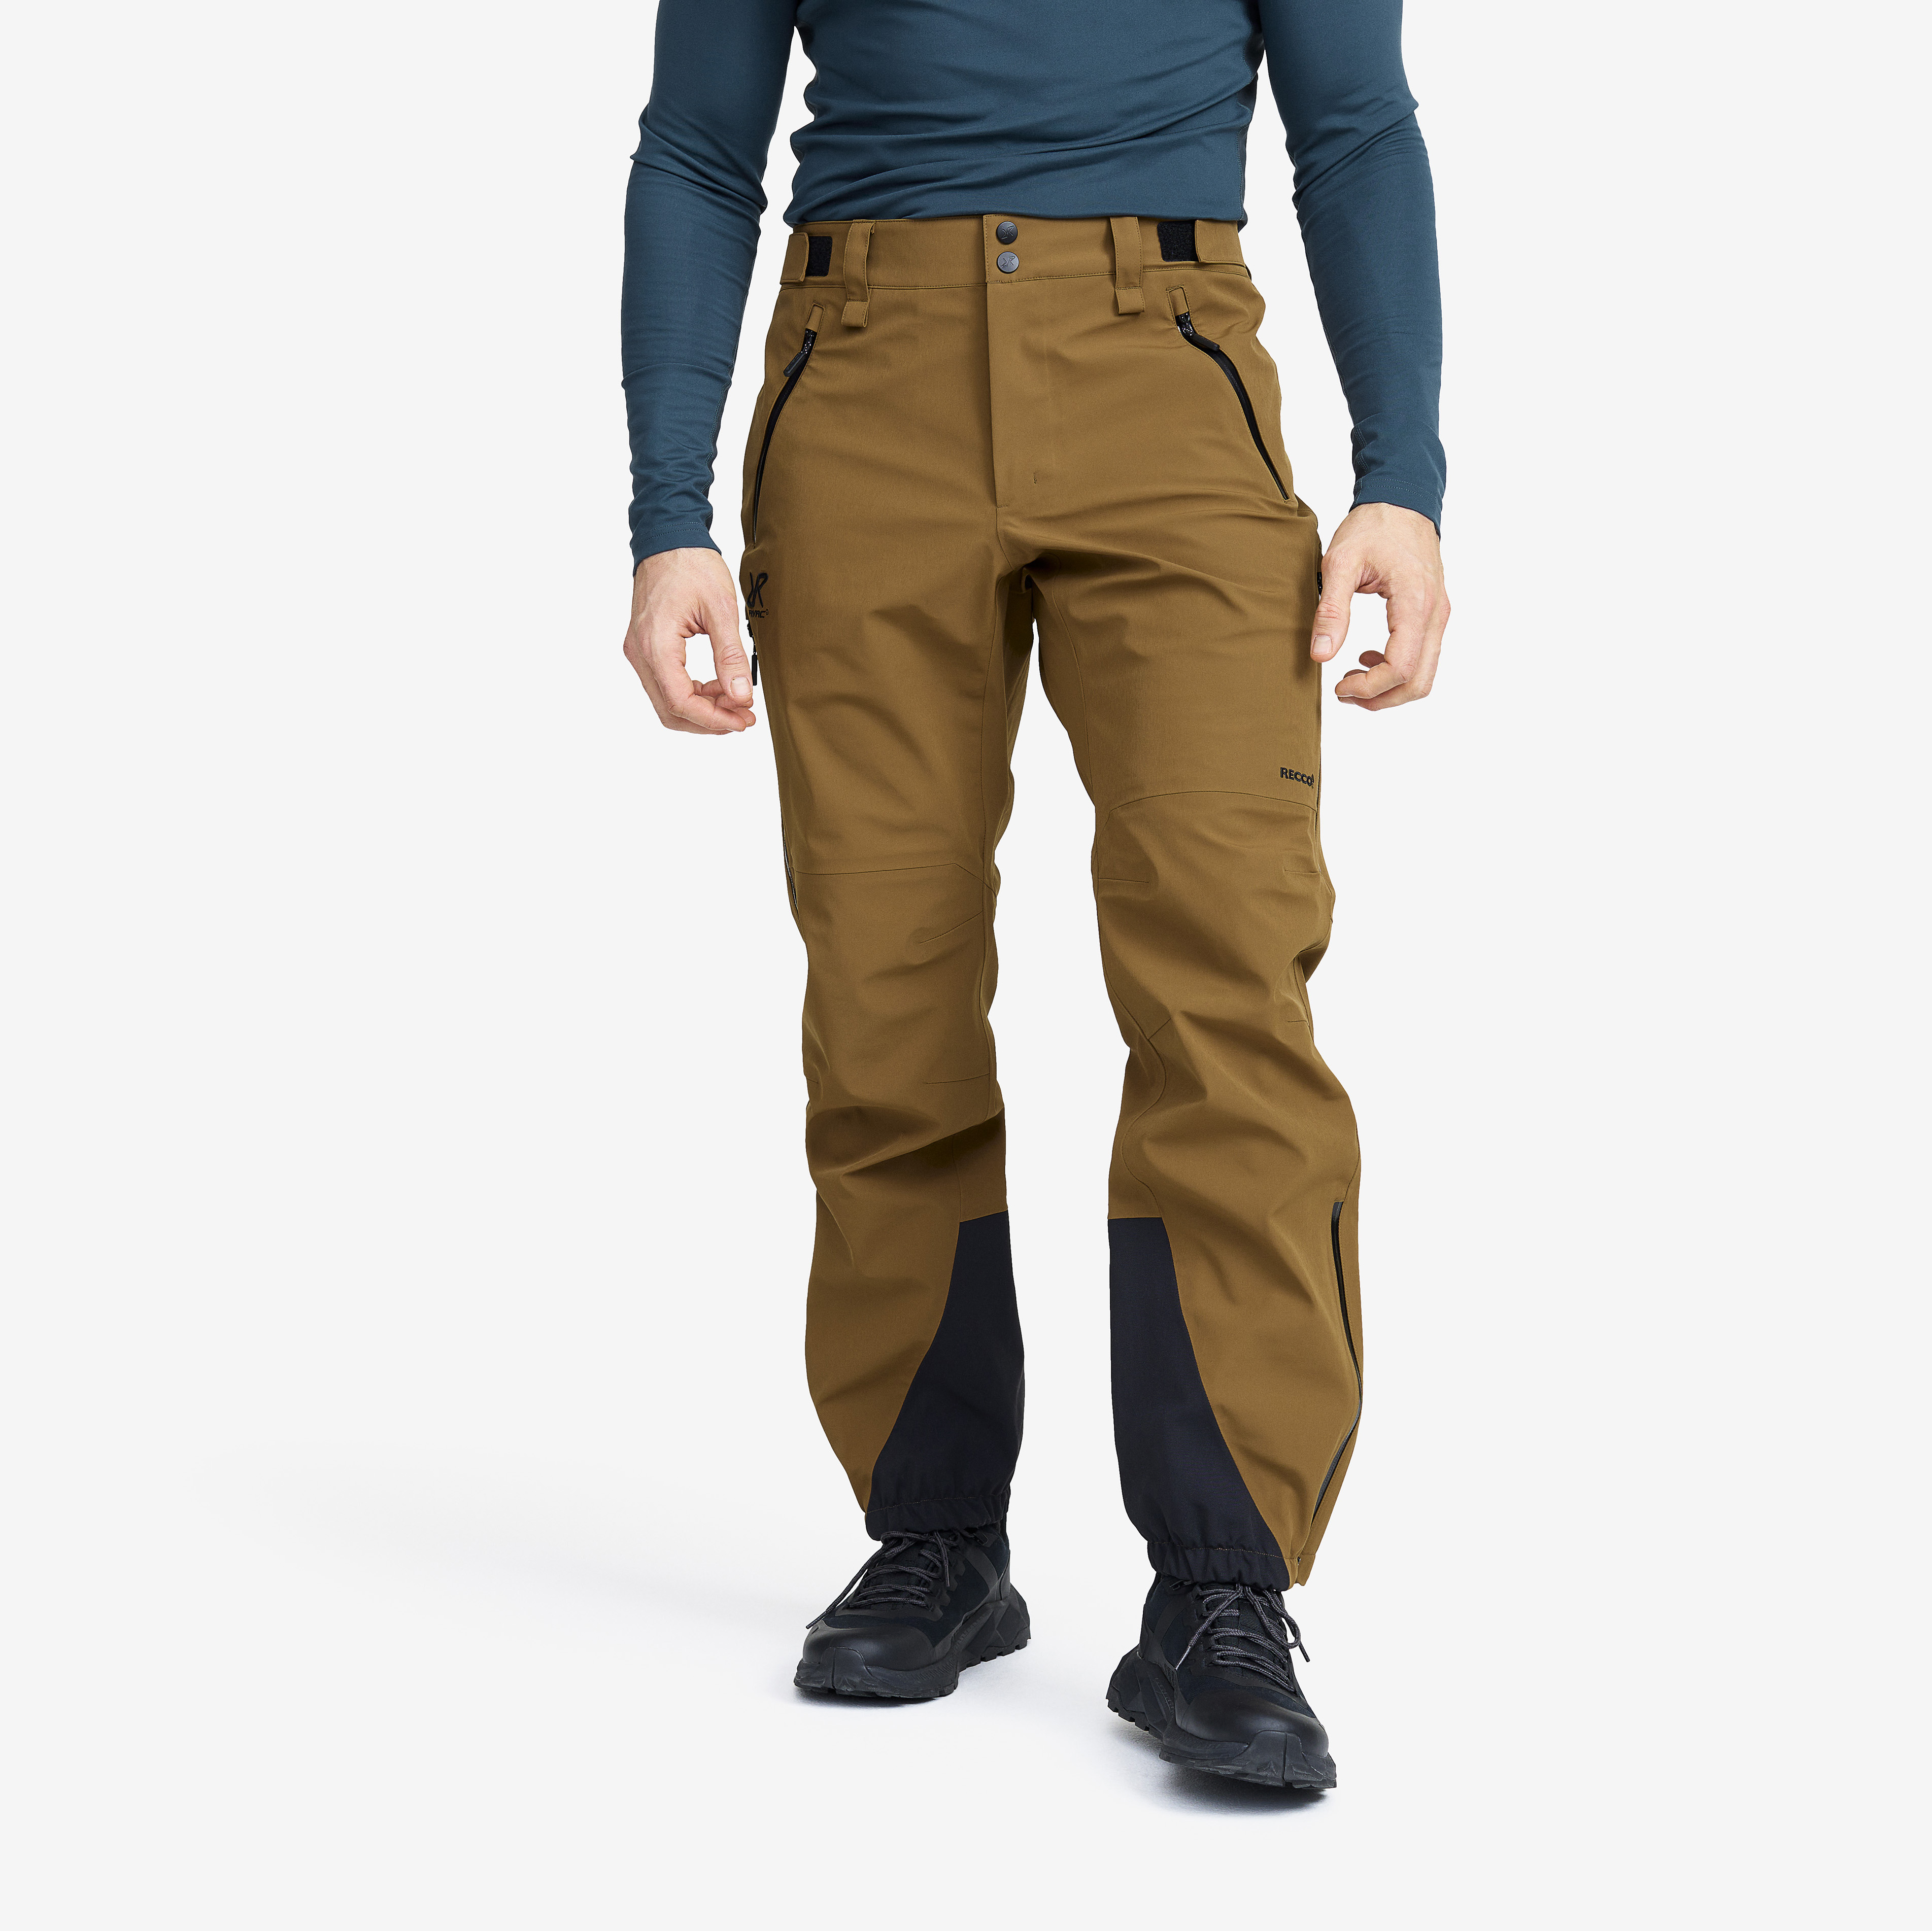 Cyclone 3L Shell Pants Rubber Homme